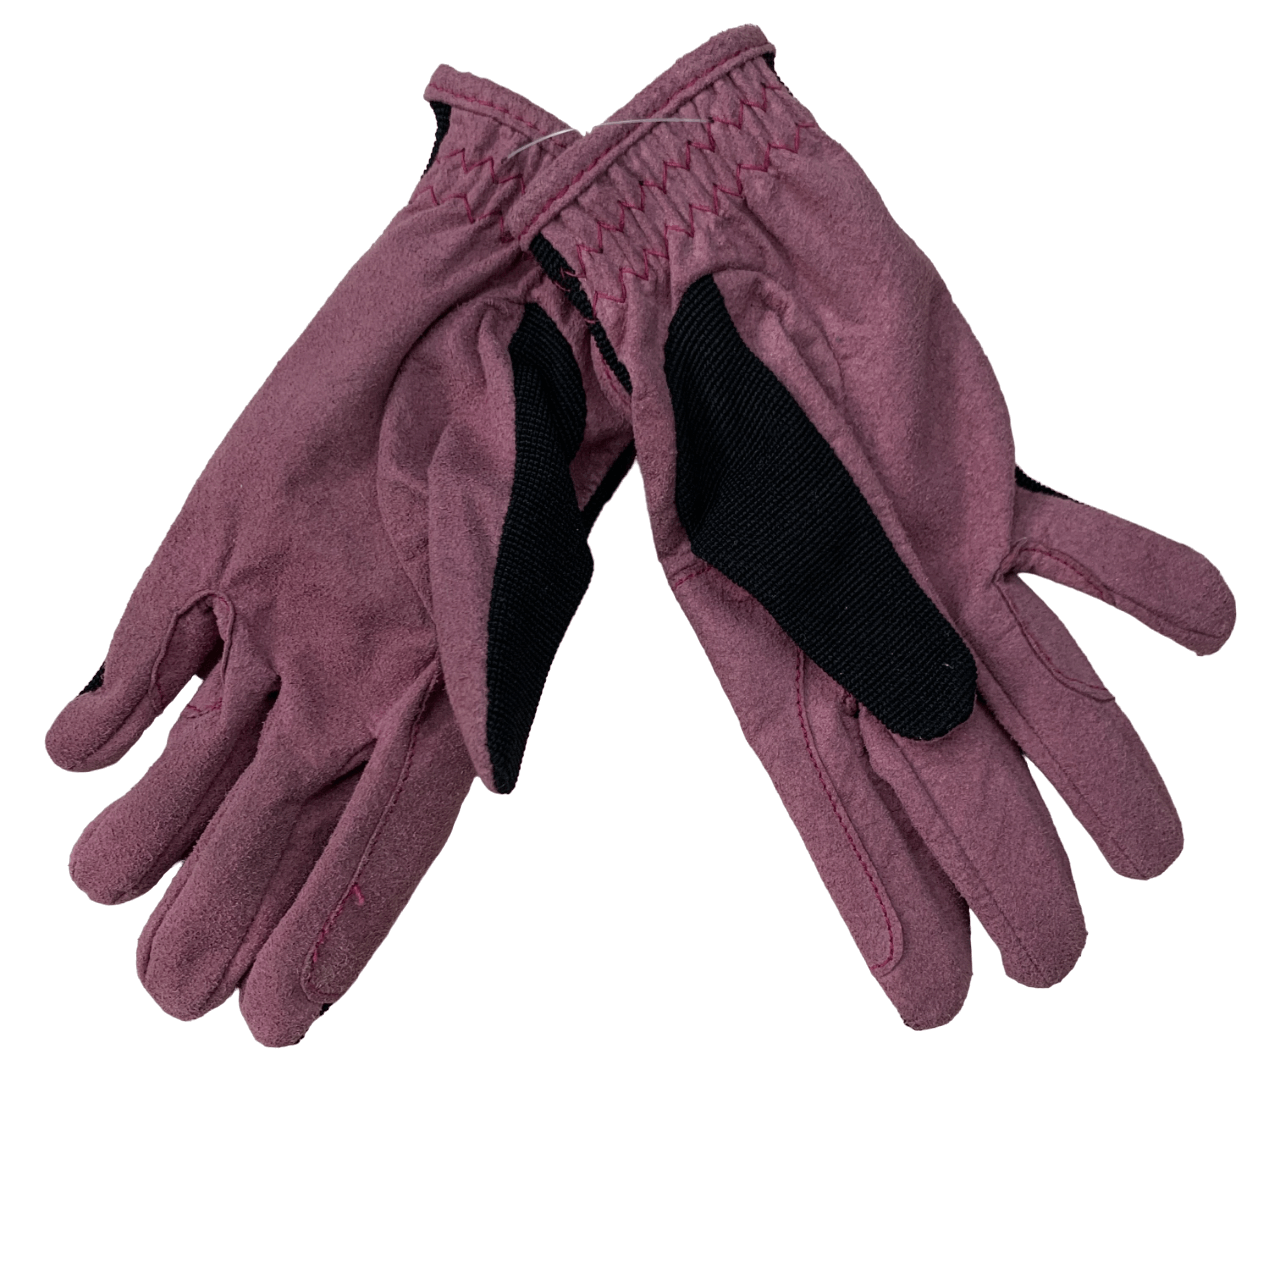 Moxie 2-Tone Comfort-Fit Riding Gloves